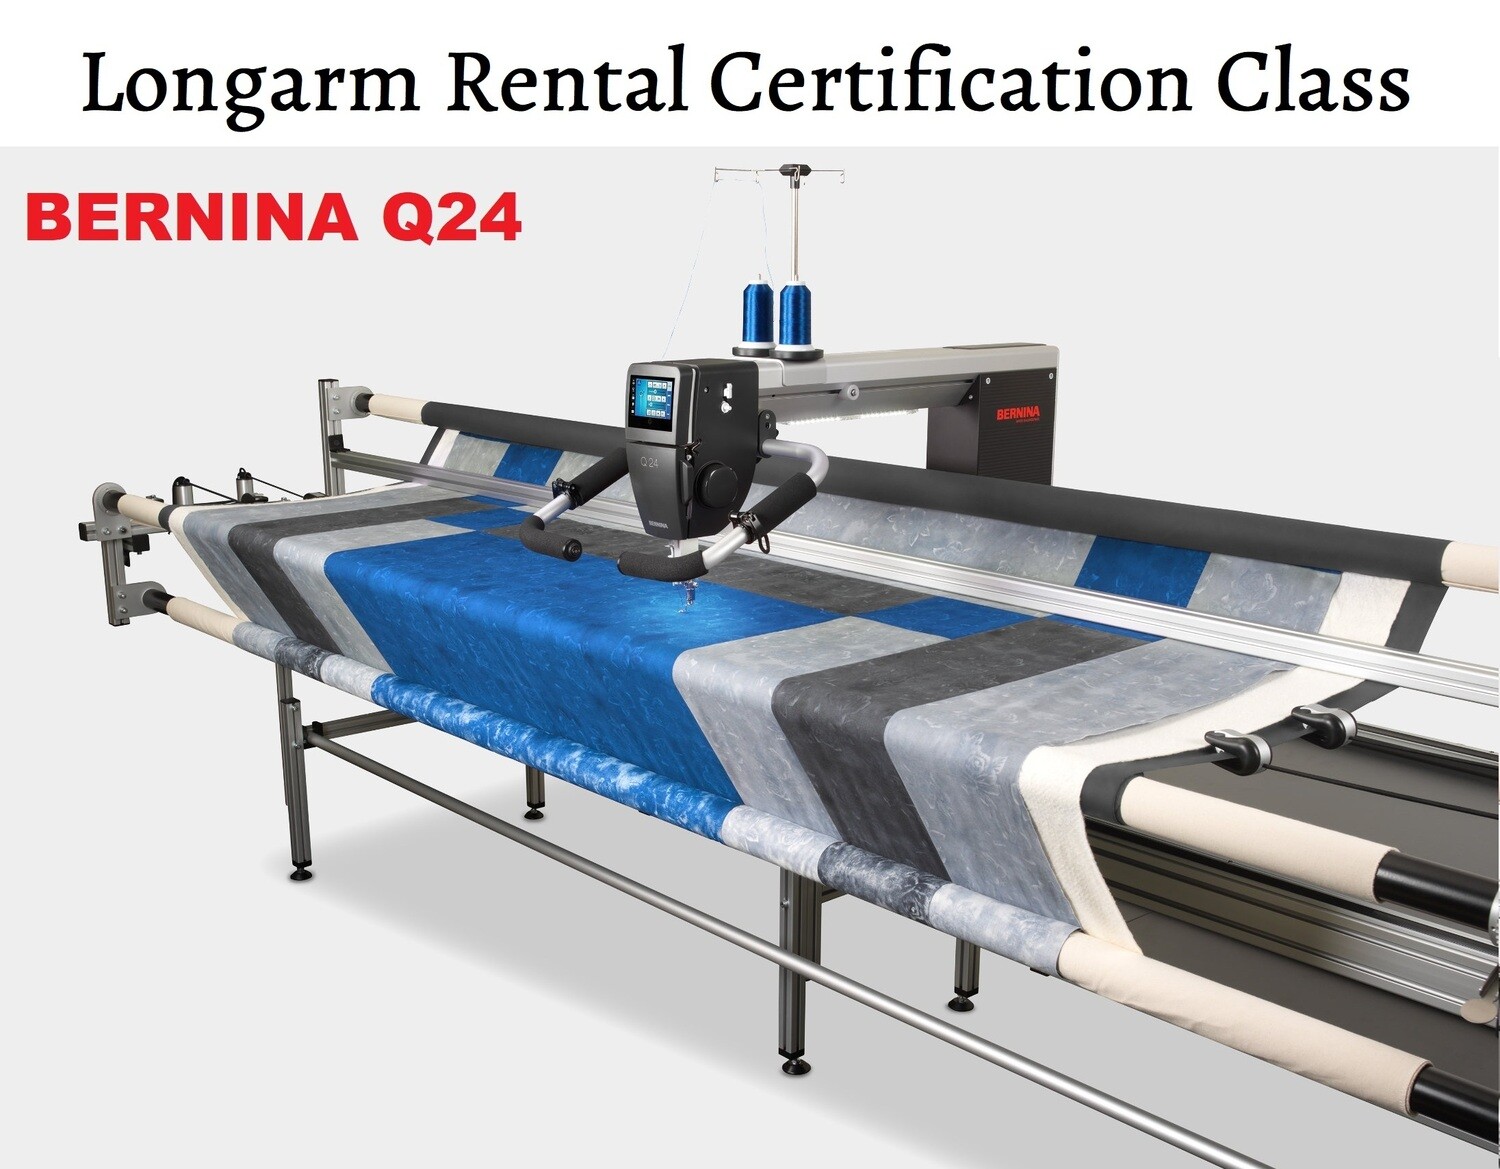 ​LONGARM RENTAL CERTIFICATION CLASS
Wednesday April 12th, 10:30 am - 4:00 pm